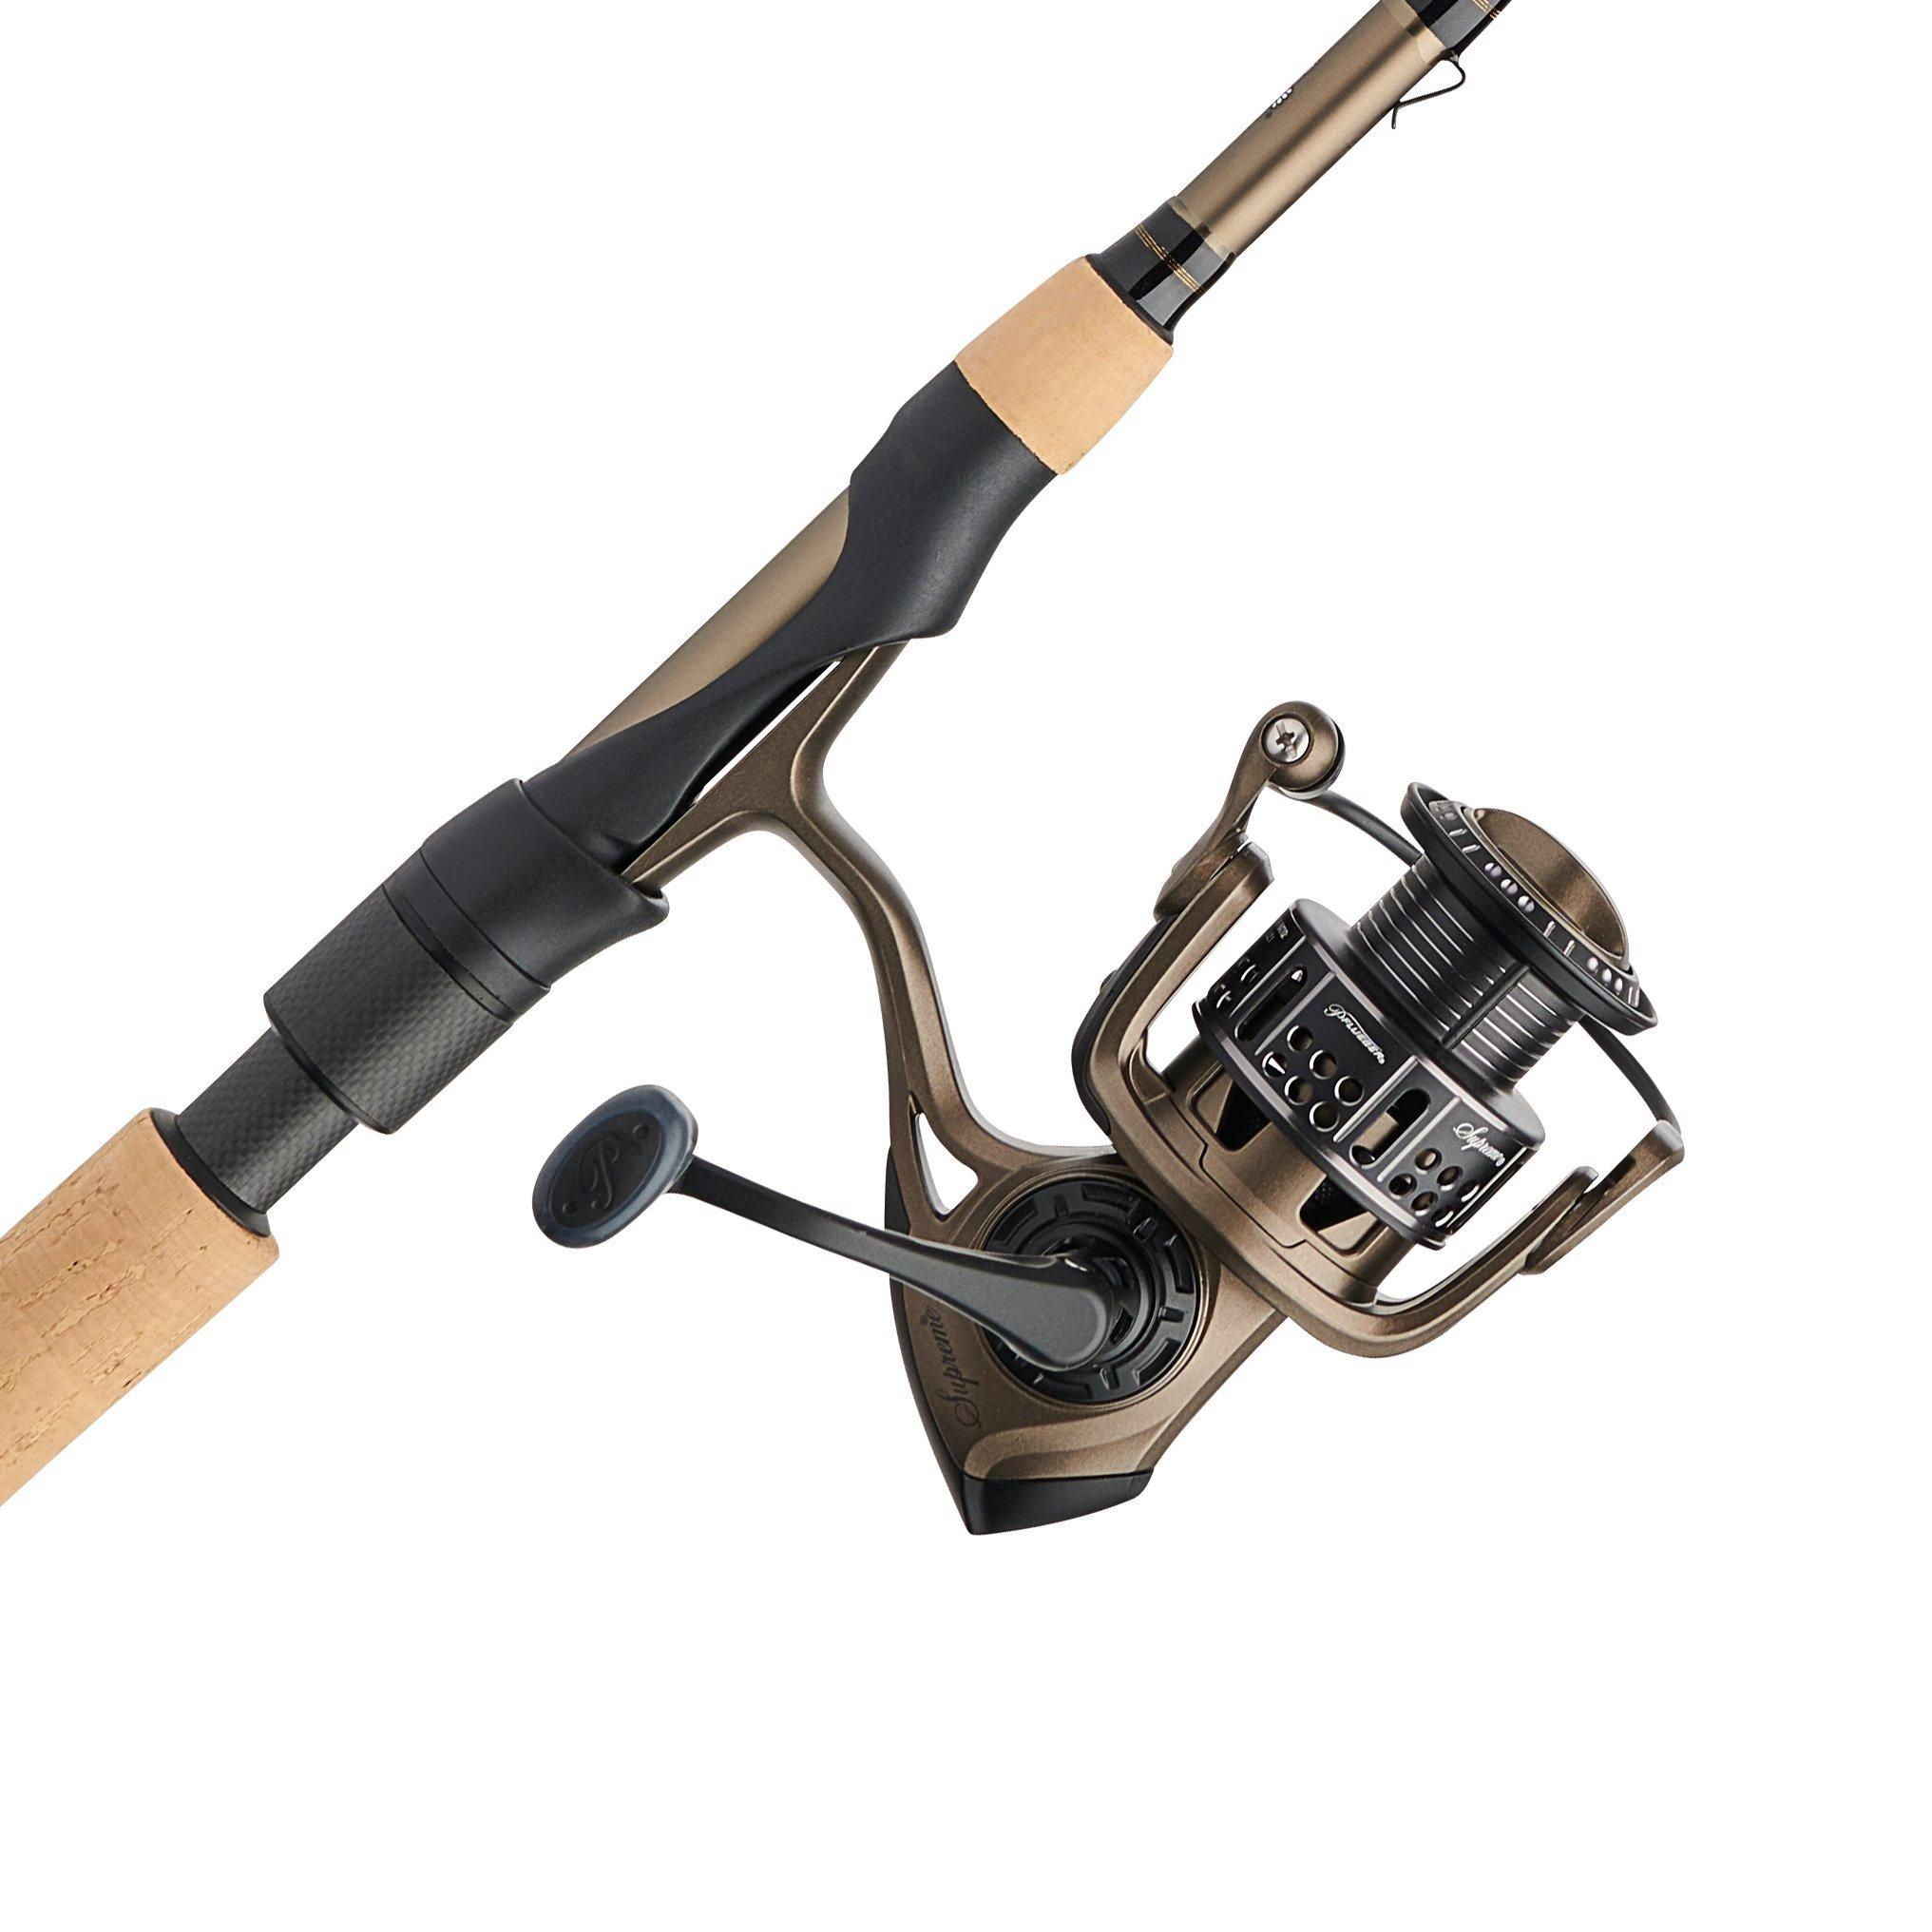 Pflueger 7' Monarch Spinning Rod and Reel Combo, Size 30 Reel